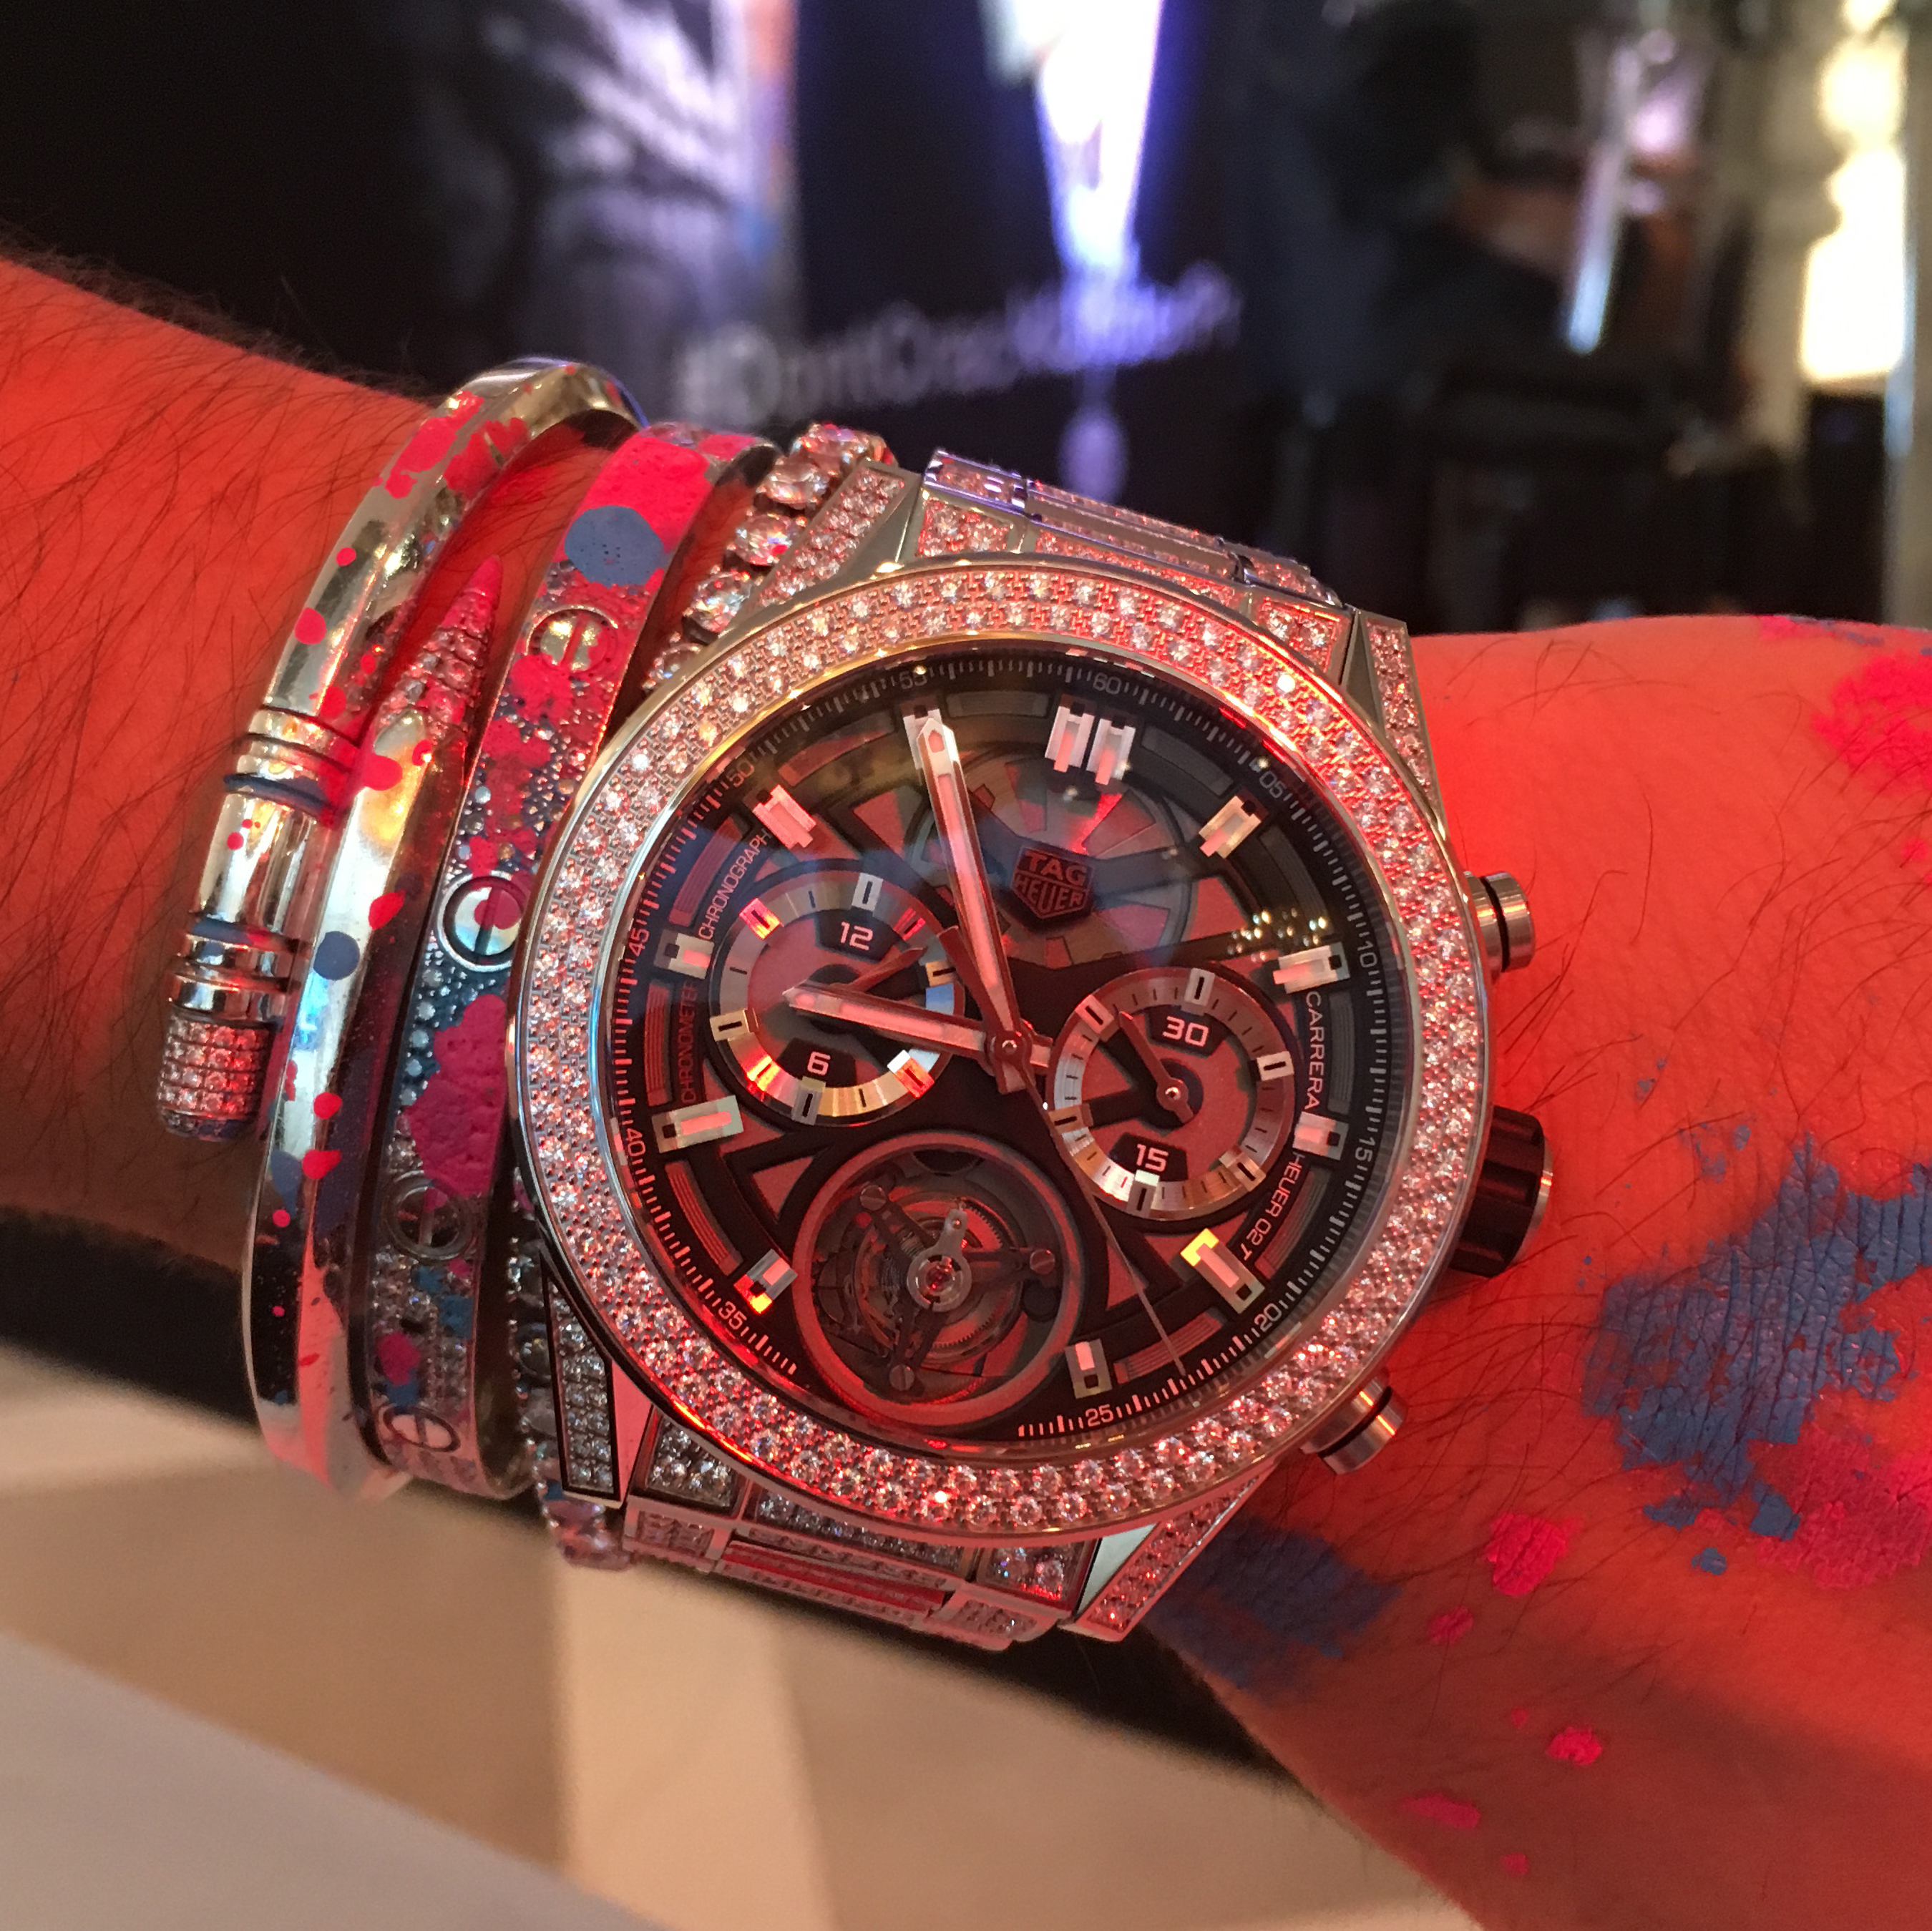 TAG Heuer's gift to Alec Monopoly, a Carrera Heuer-02T tourbillon chronograph watch set with diamonds.